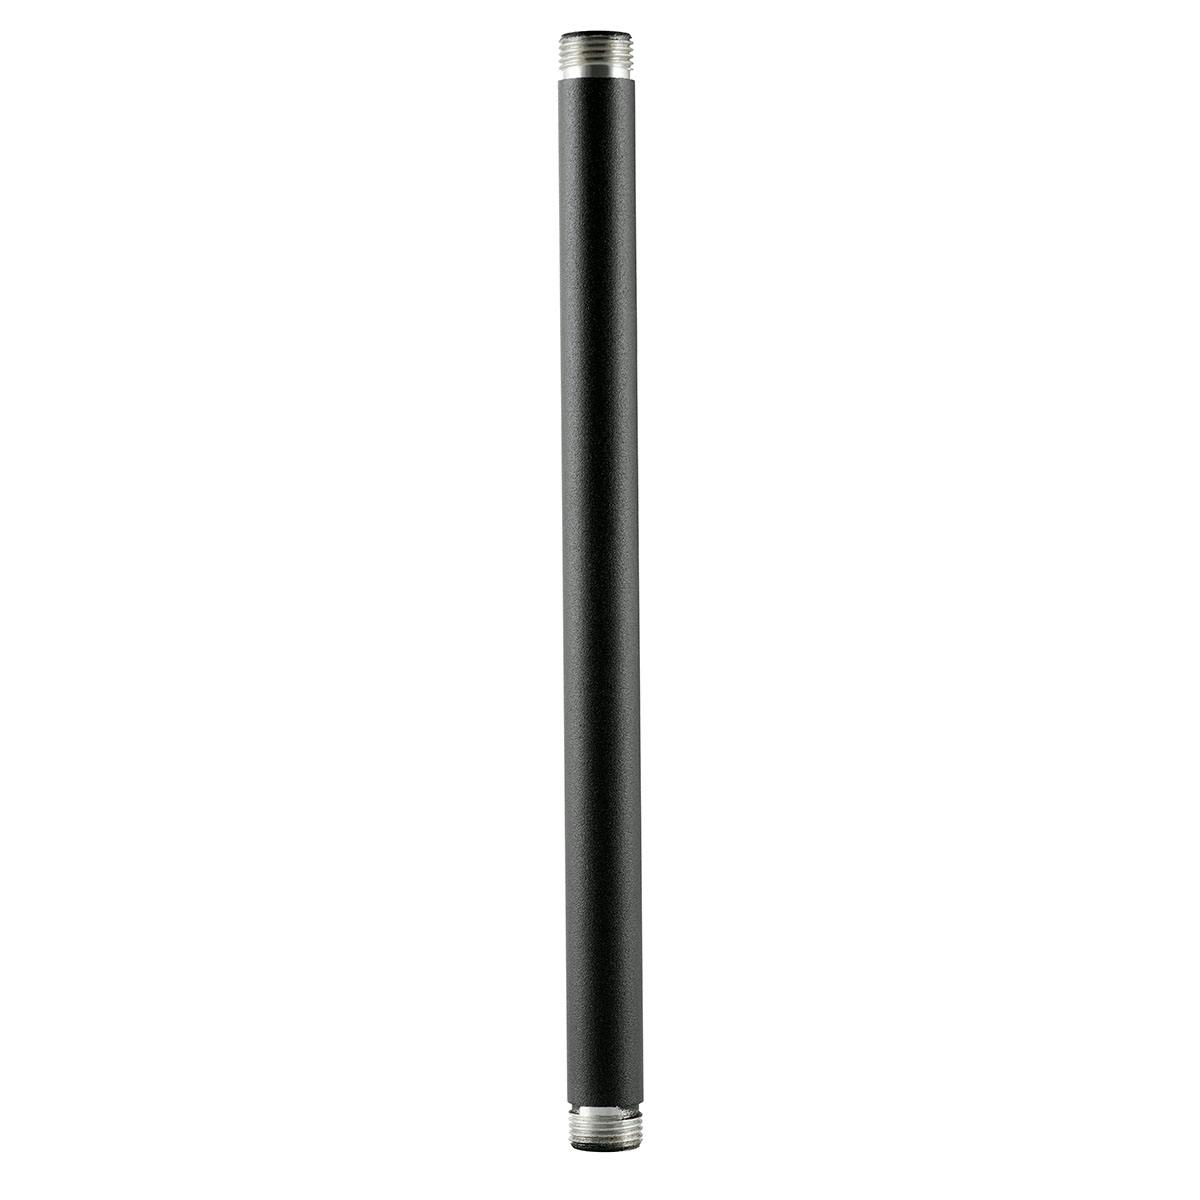 12" Fixture Mounting Stems .5 NPSM Black on a white background